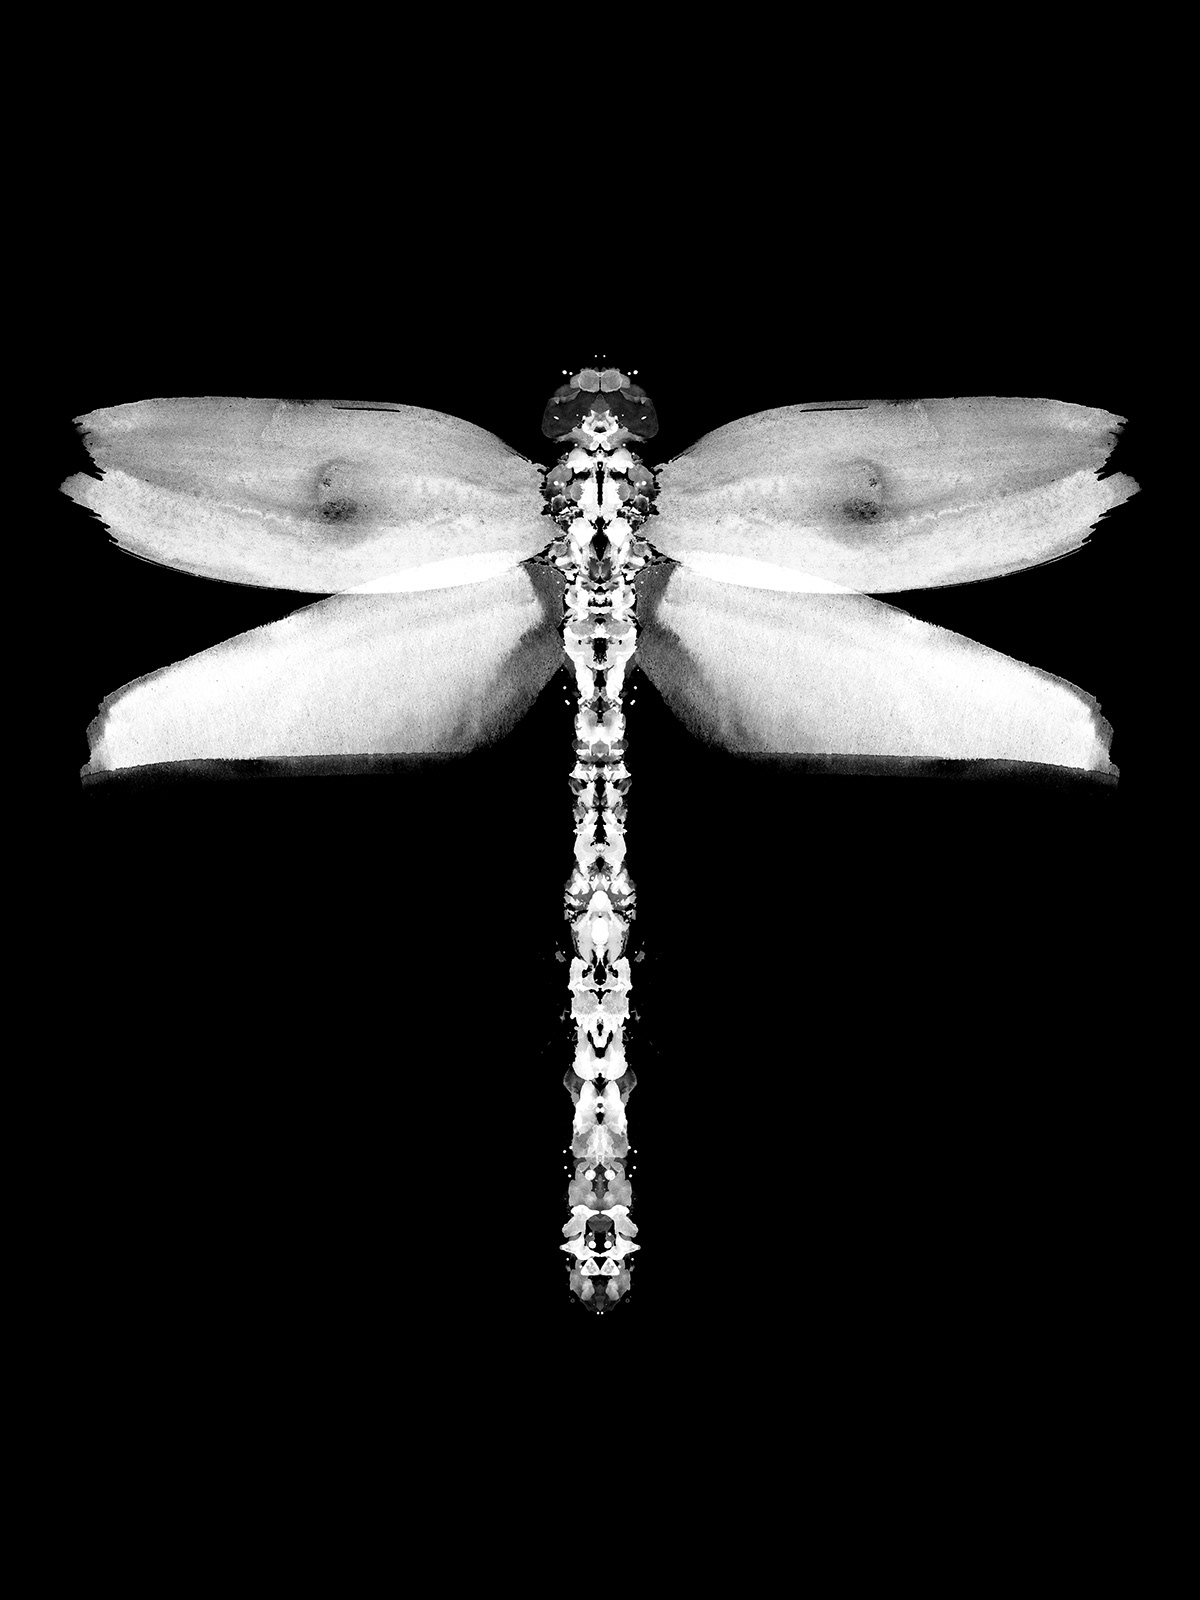 Mirrored art of a dragonfly.